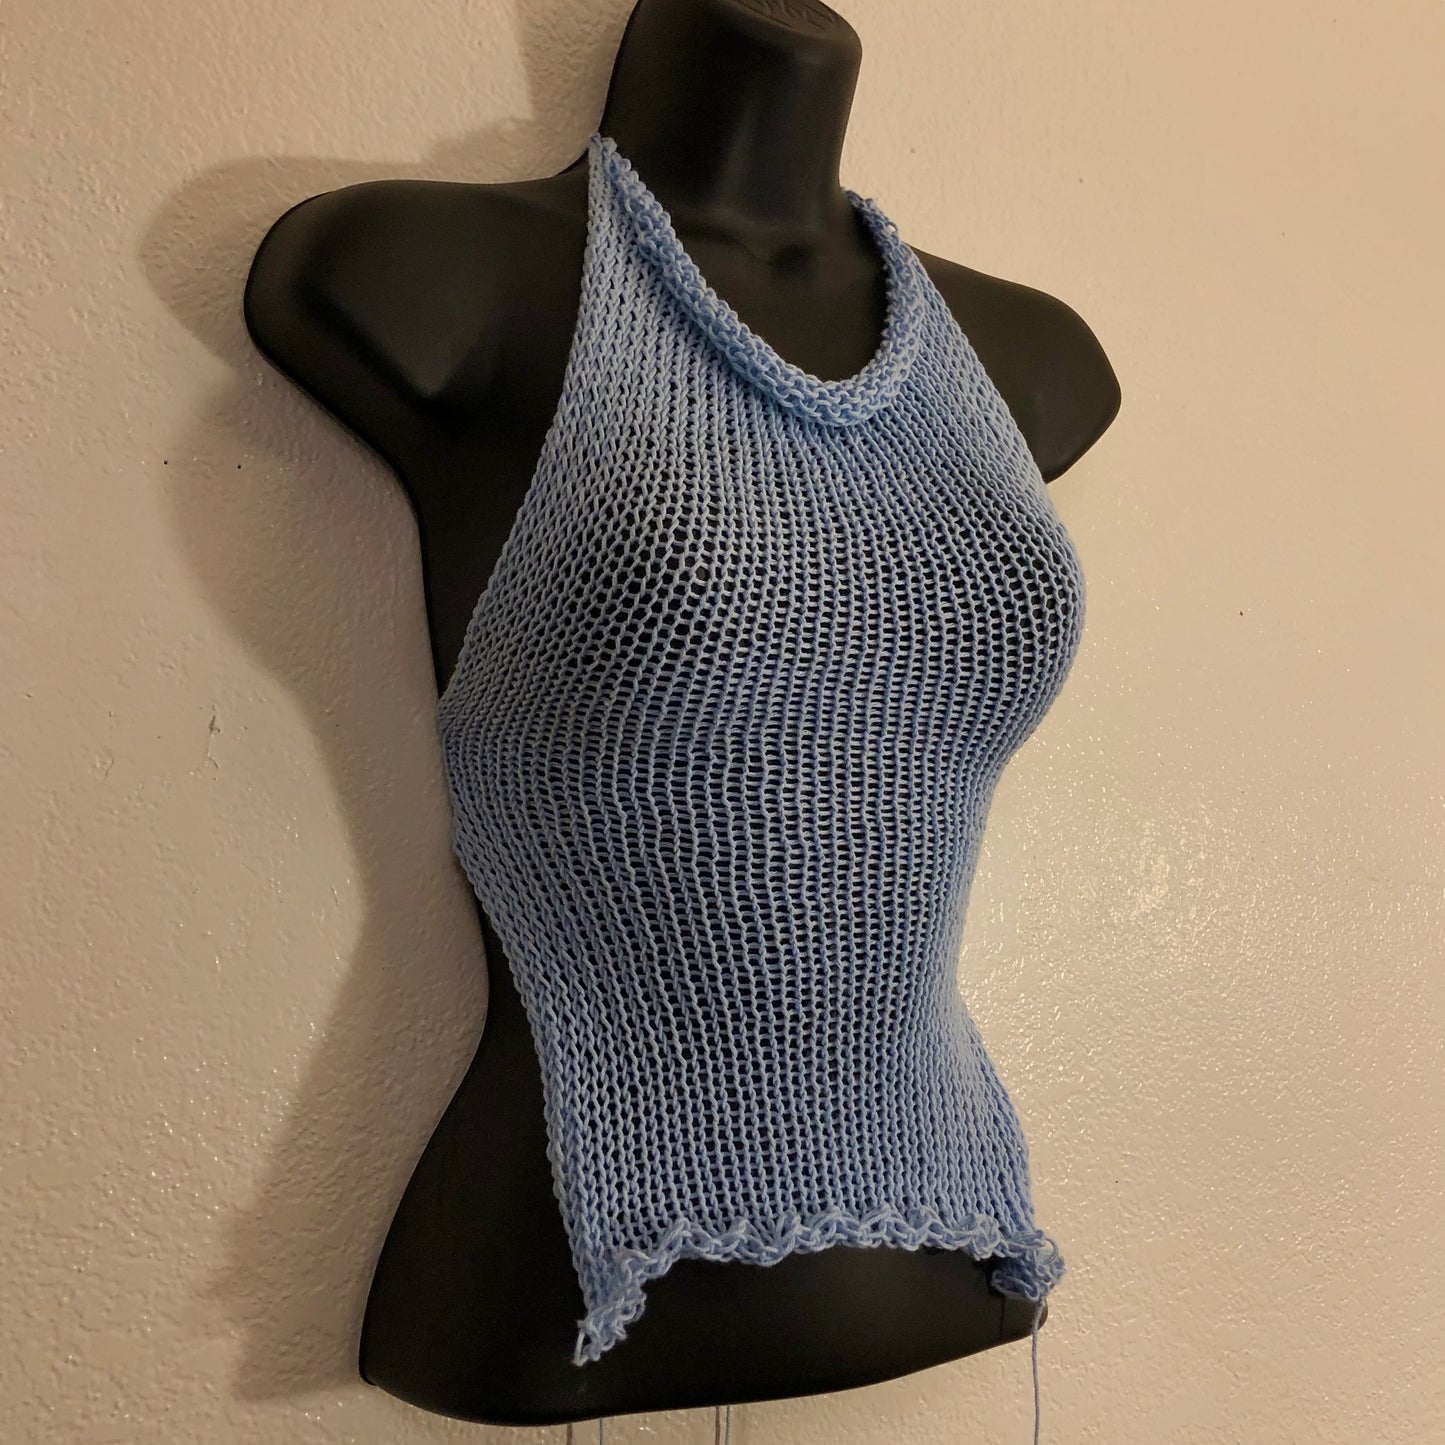 Baby Blue Knit Top